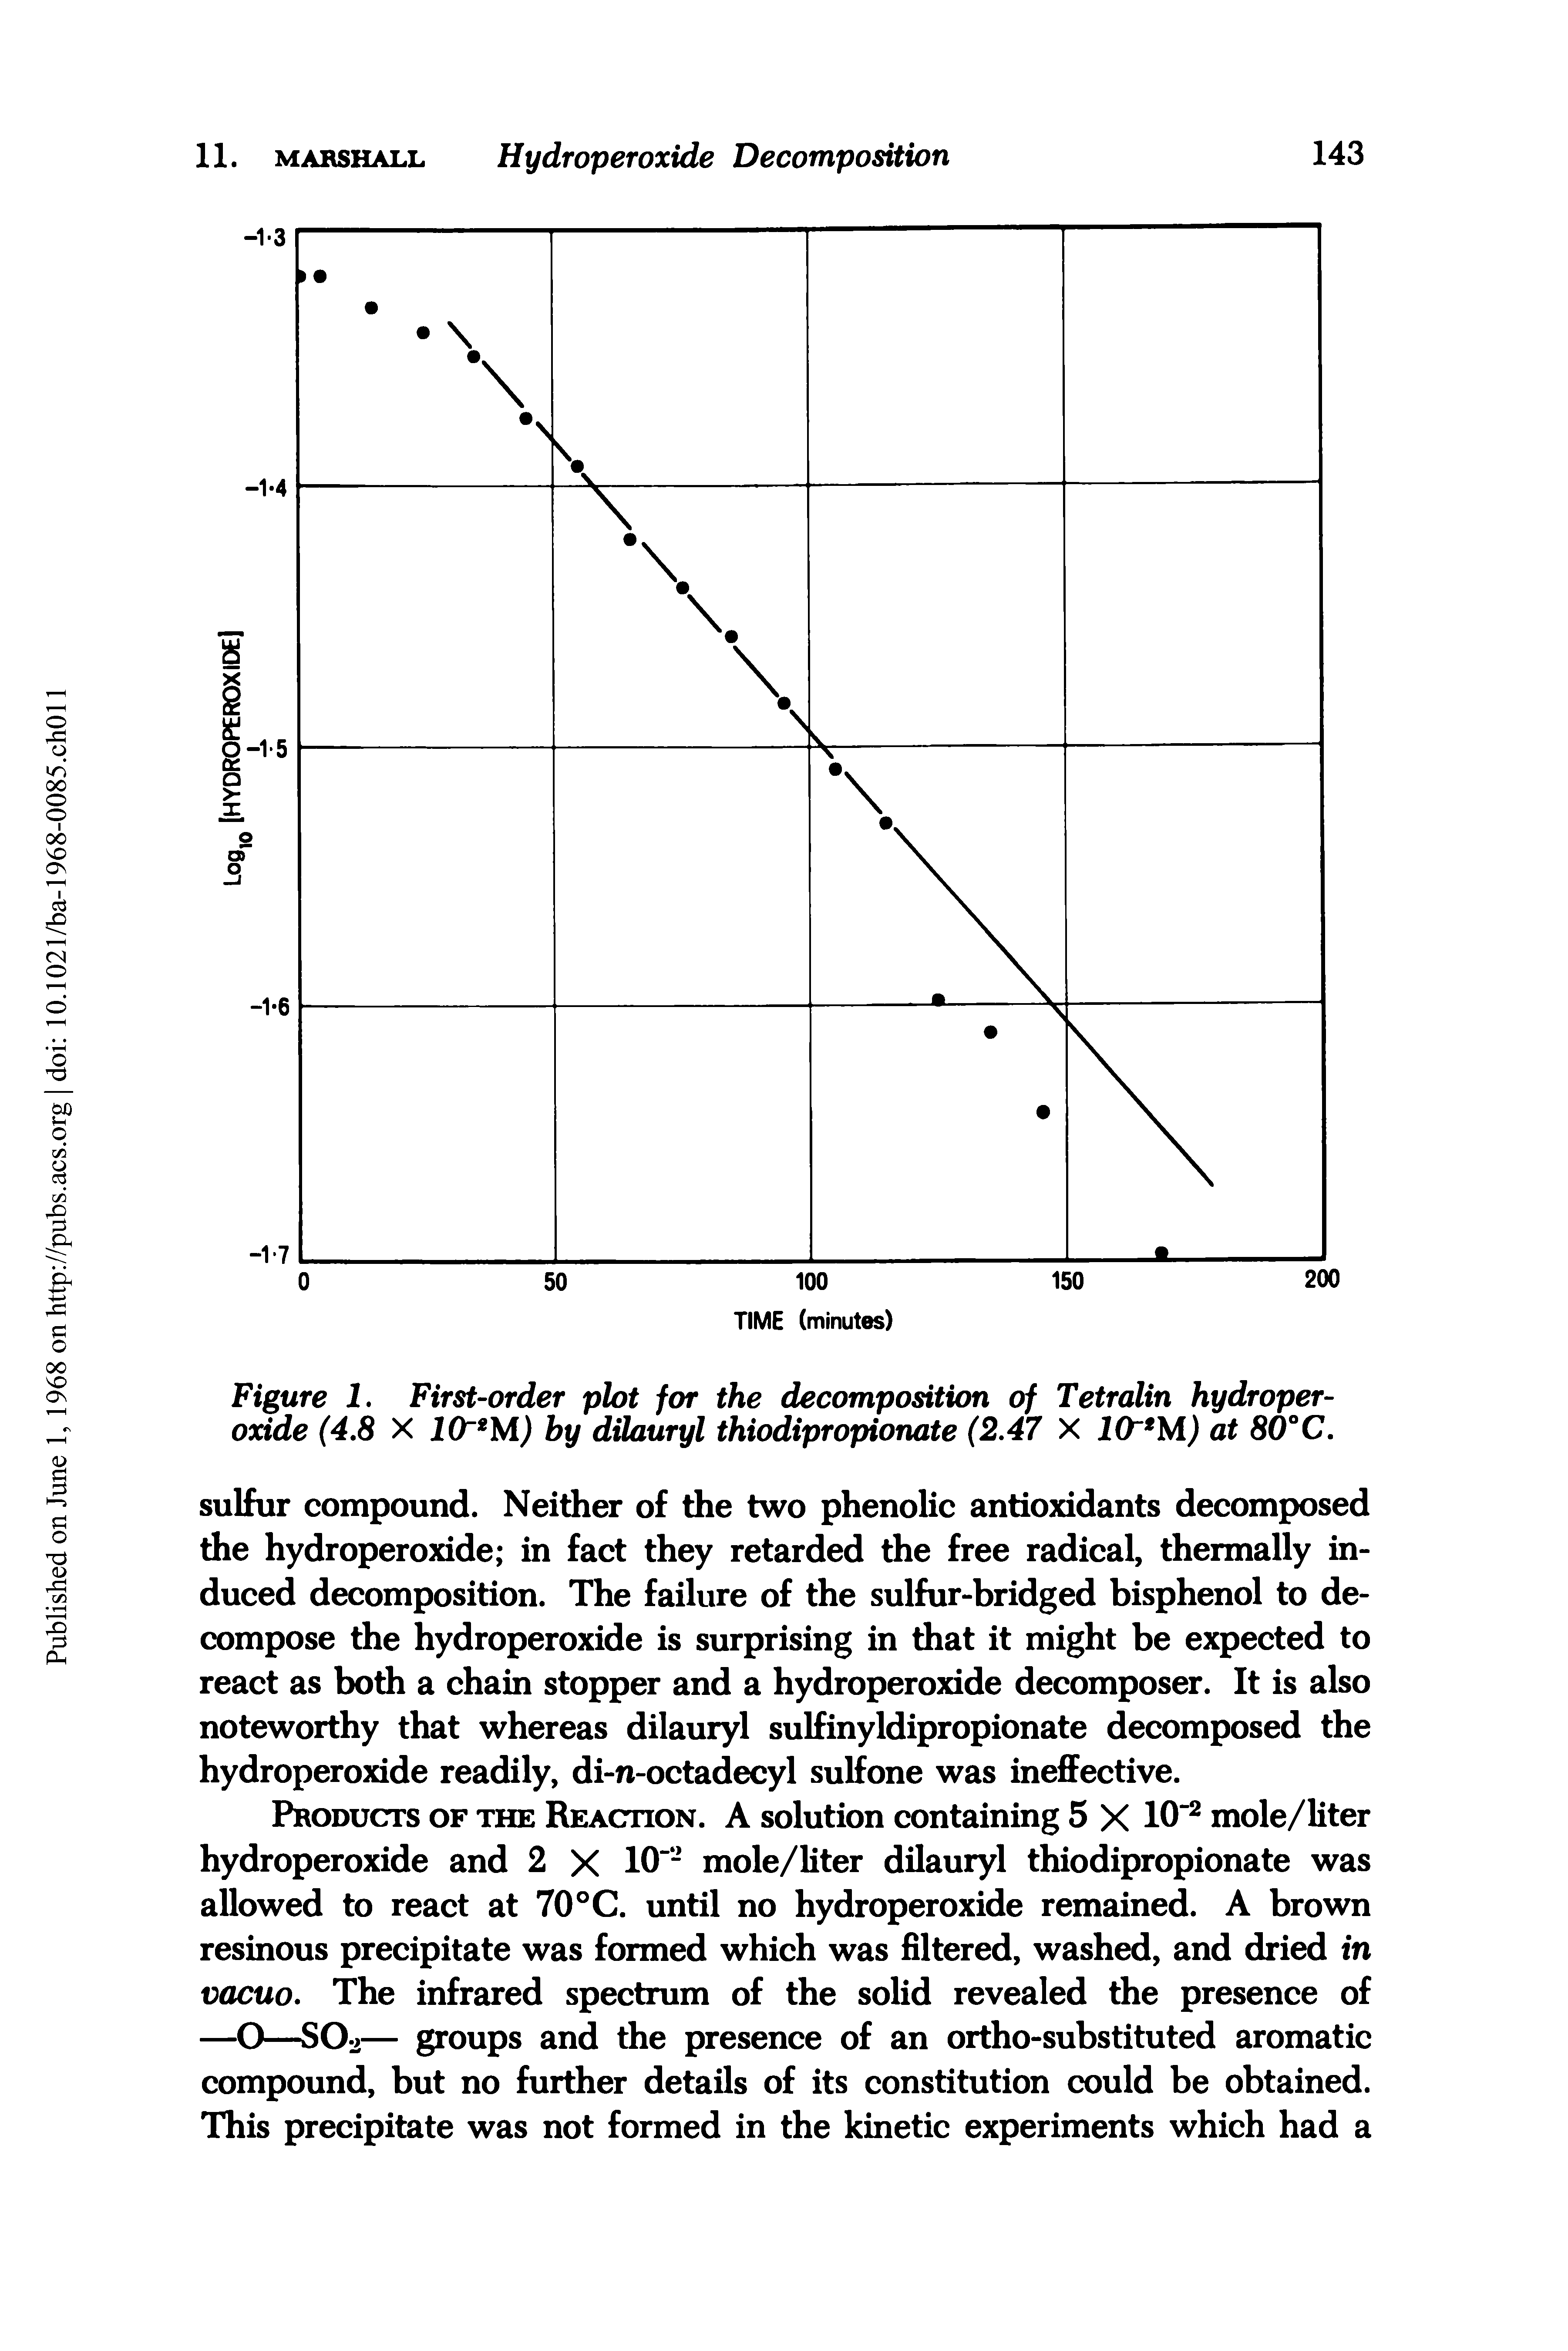 Figure 1. First-order plot for the decomposition of Tetralin hydroperoxide (4.8 X 10" M) by dilauryl thiodipropionate (2.47 X 10 M) at 80°C.